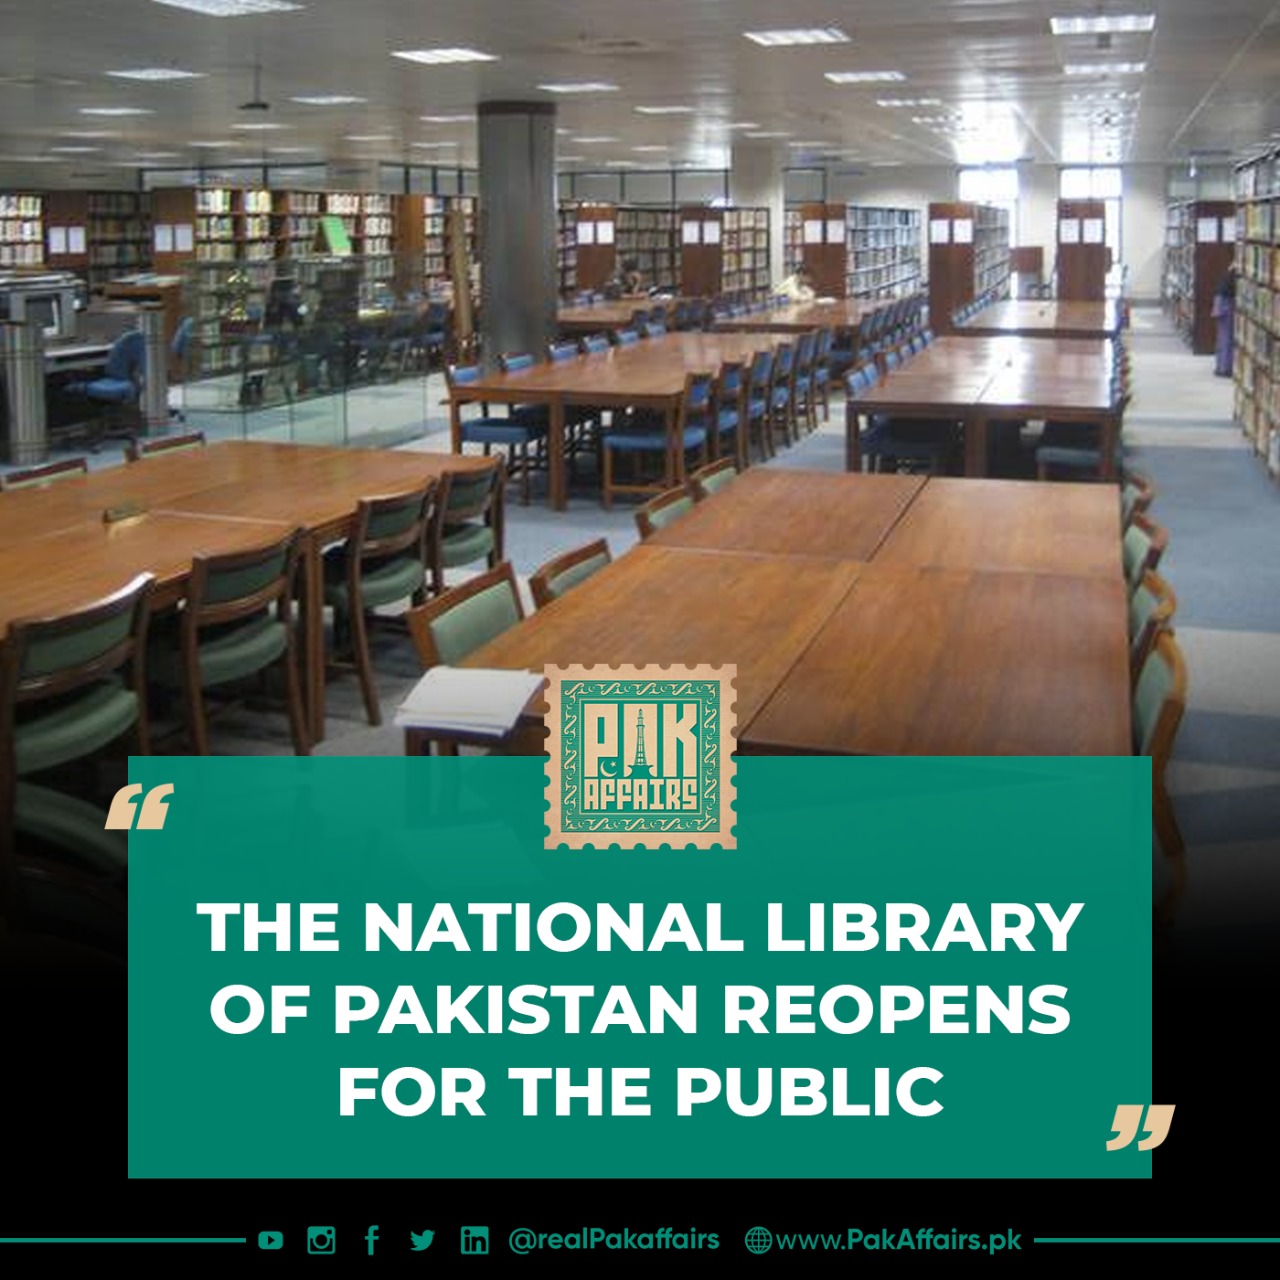 The National Library of Pakistan reopens for the public after seven months